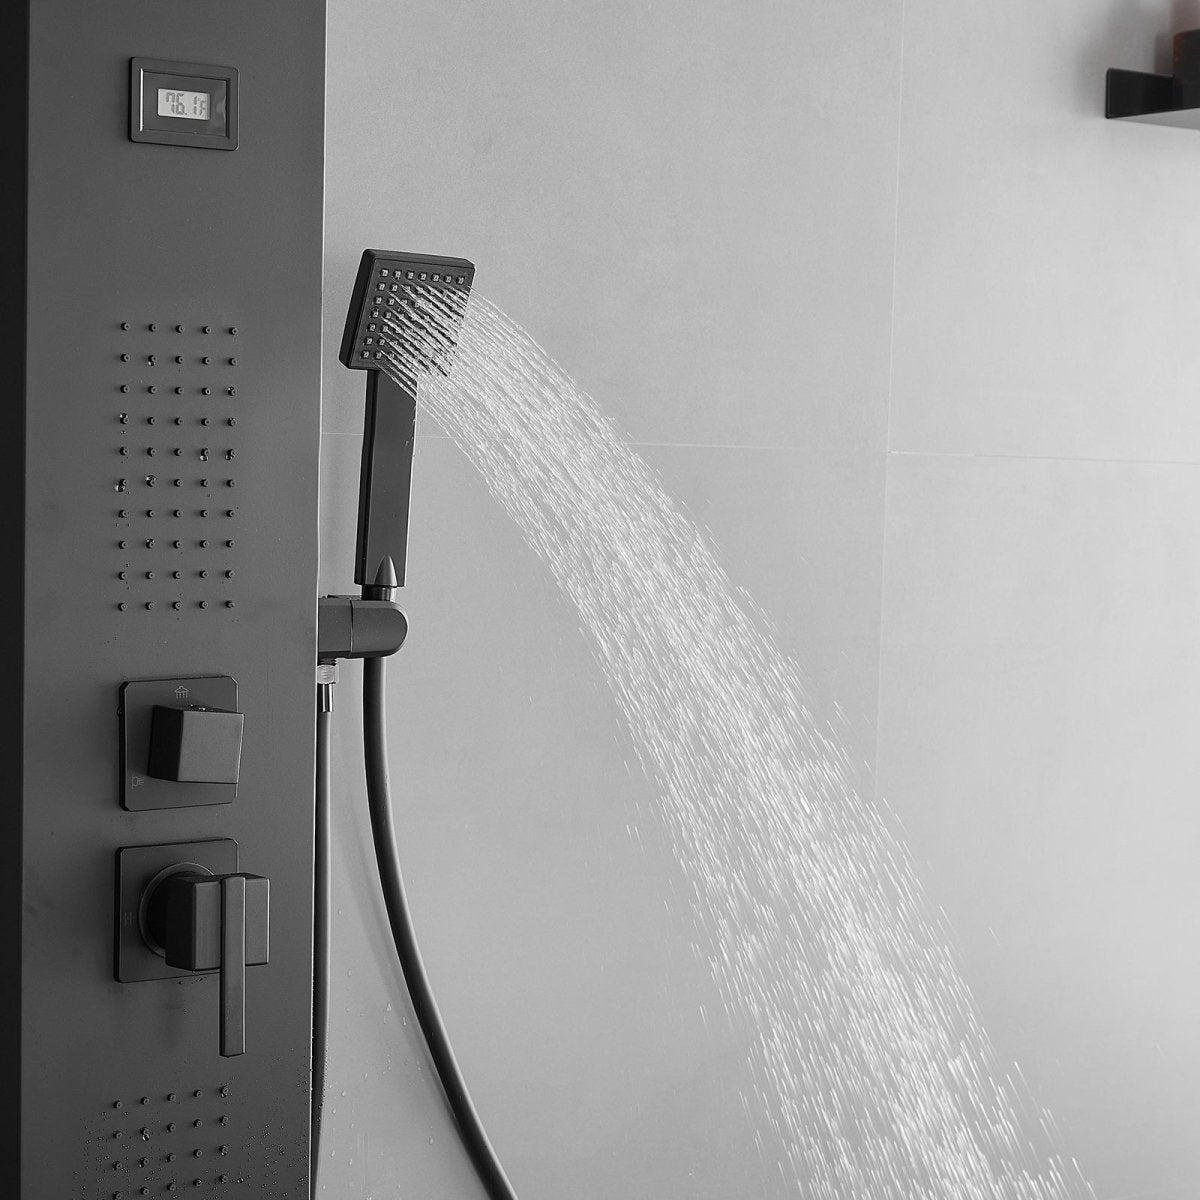 2-Jet Rainfall Shower Panel System in Stainless Steel Black - buyfaucet.com